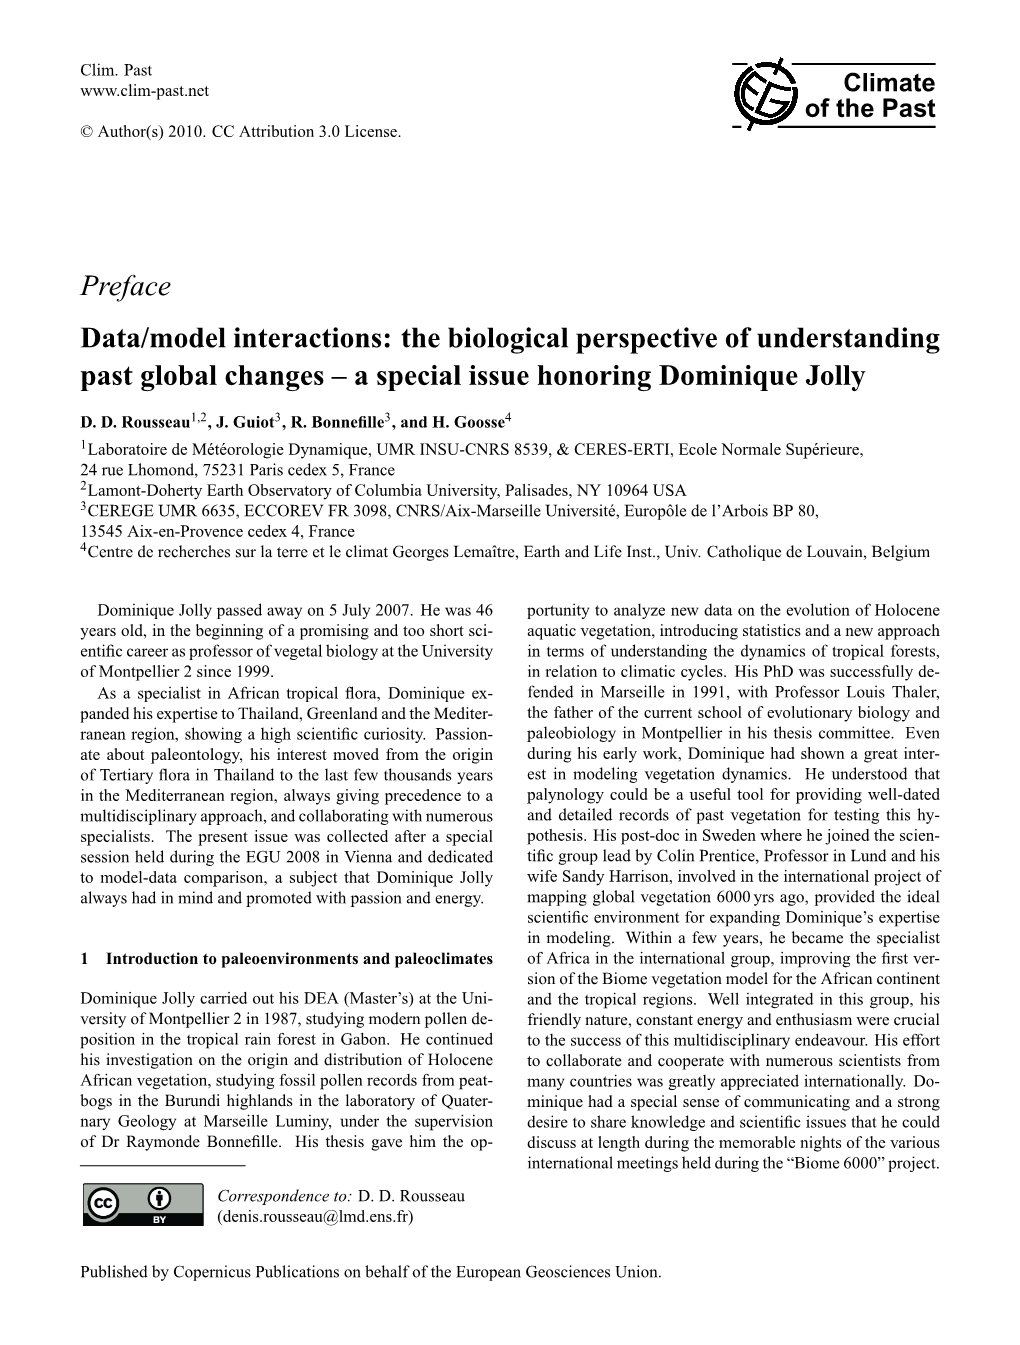 Preface Data/Model Interactions: the Biological Perspective of Understanding Past Global Changes – a Special Issue Honoring Dominique Jolly